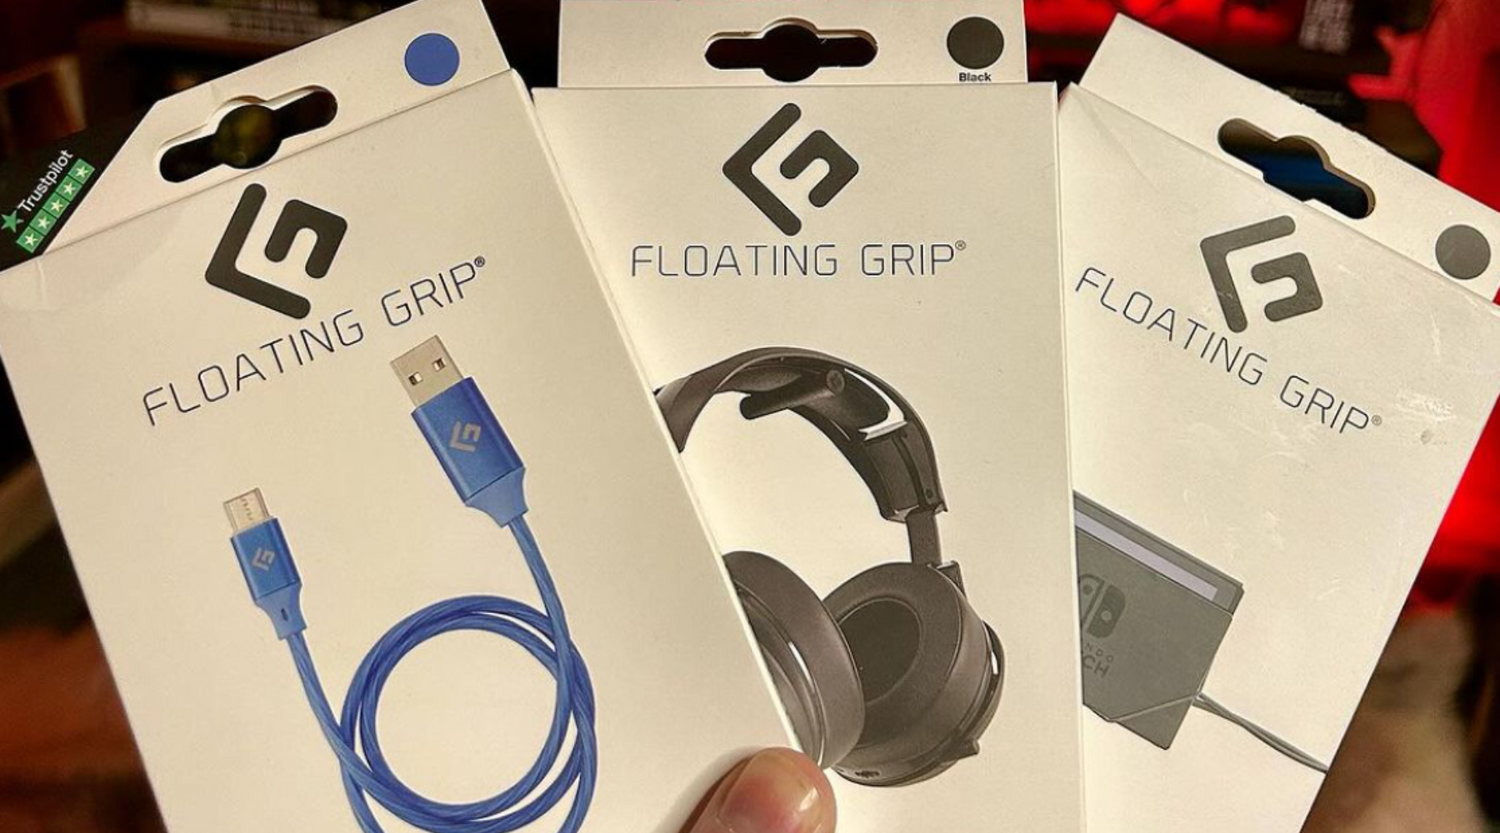 Elevate the Celebration: Top 5 Birthday Gift Ideas for Gamers with FLOATING GRIP